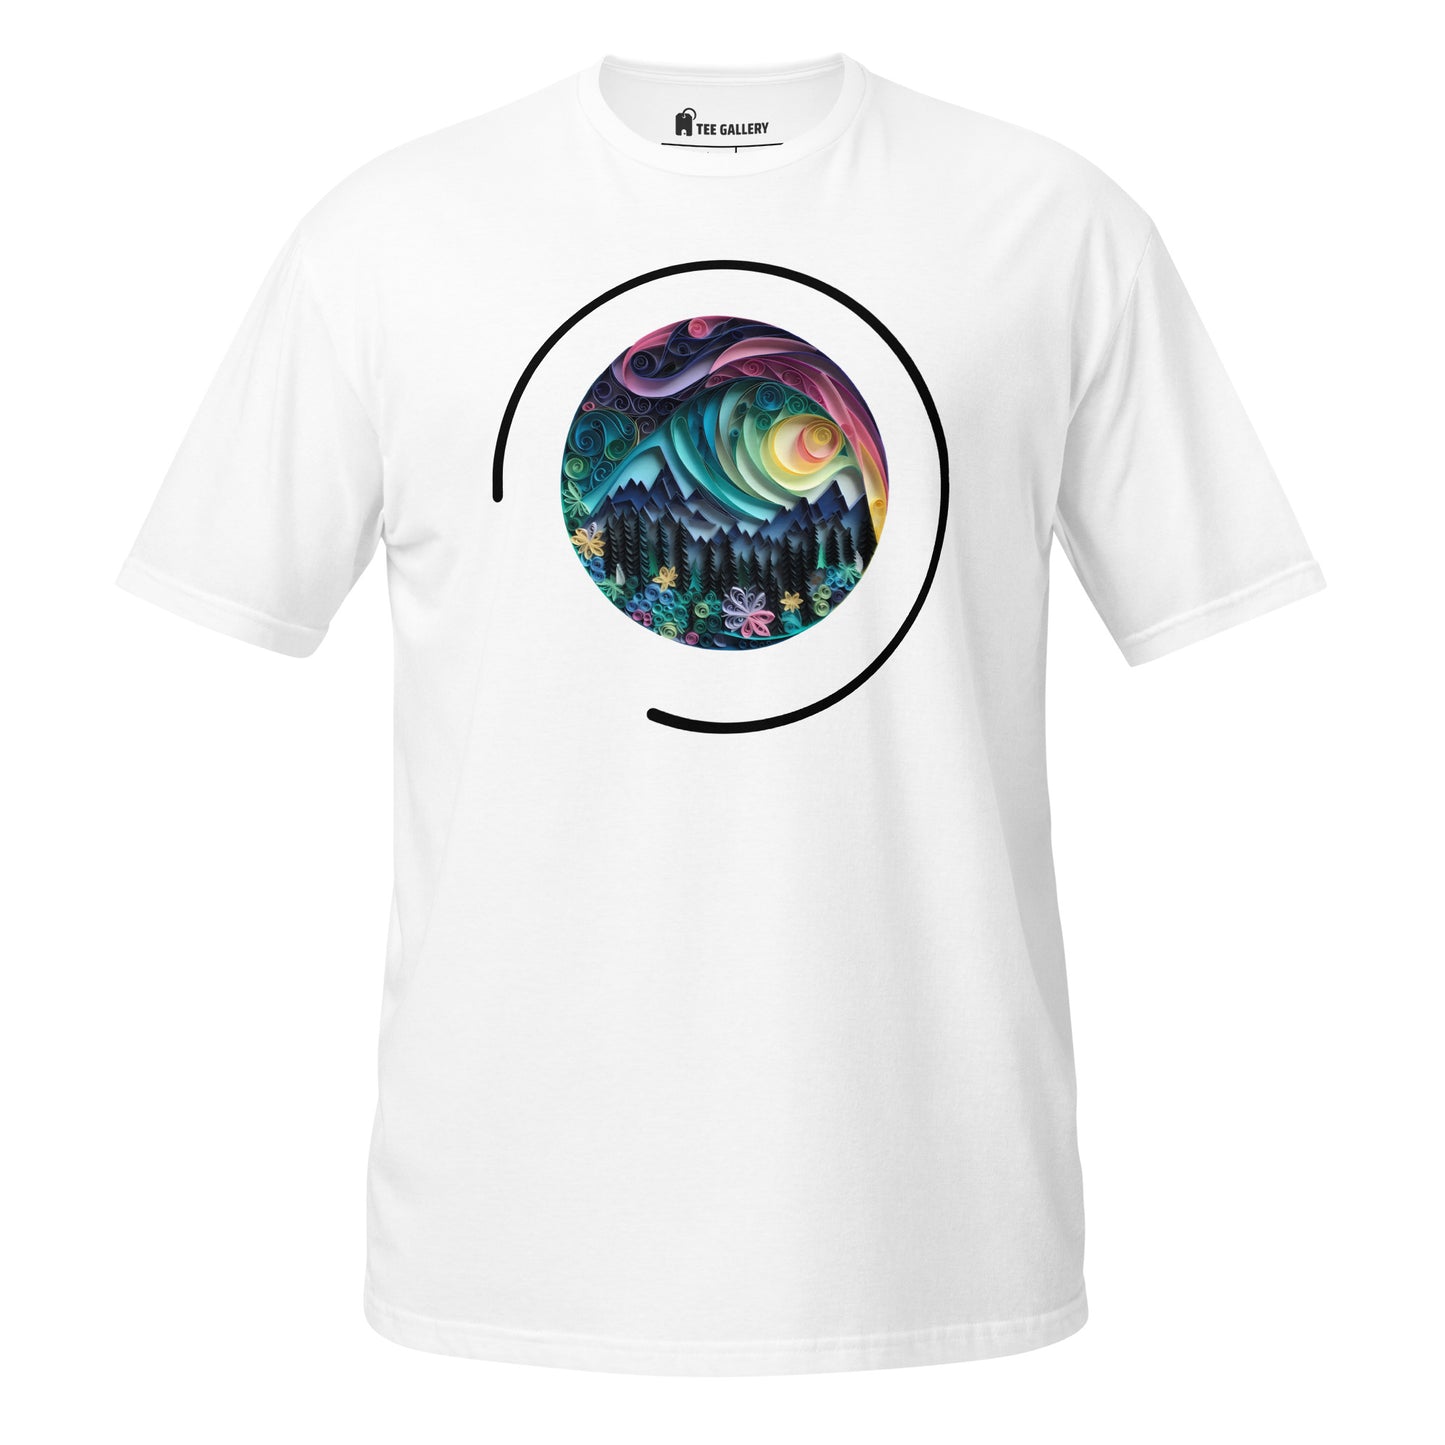 Aurora Borealis Nights: Graphic Tee Inspired by the Mesmerizing Northern Lights